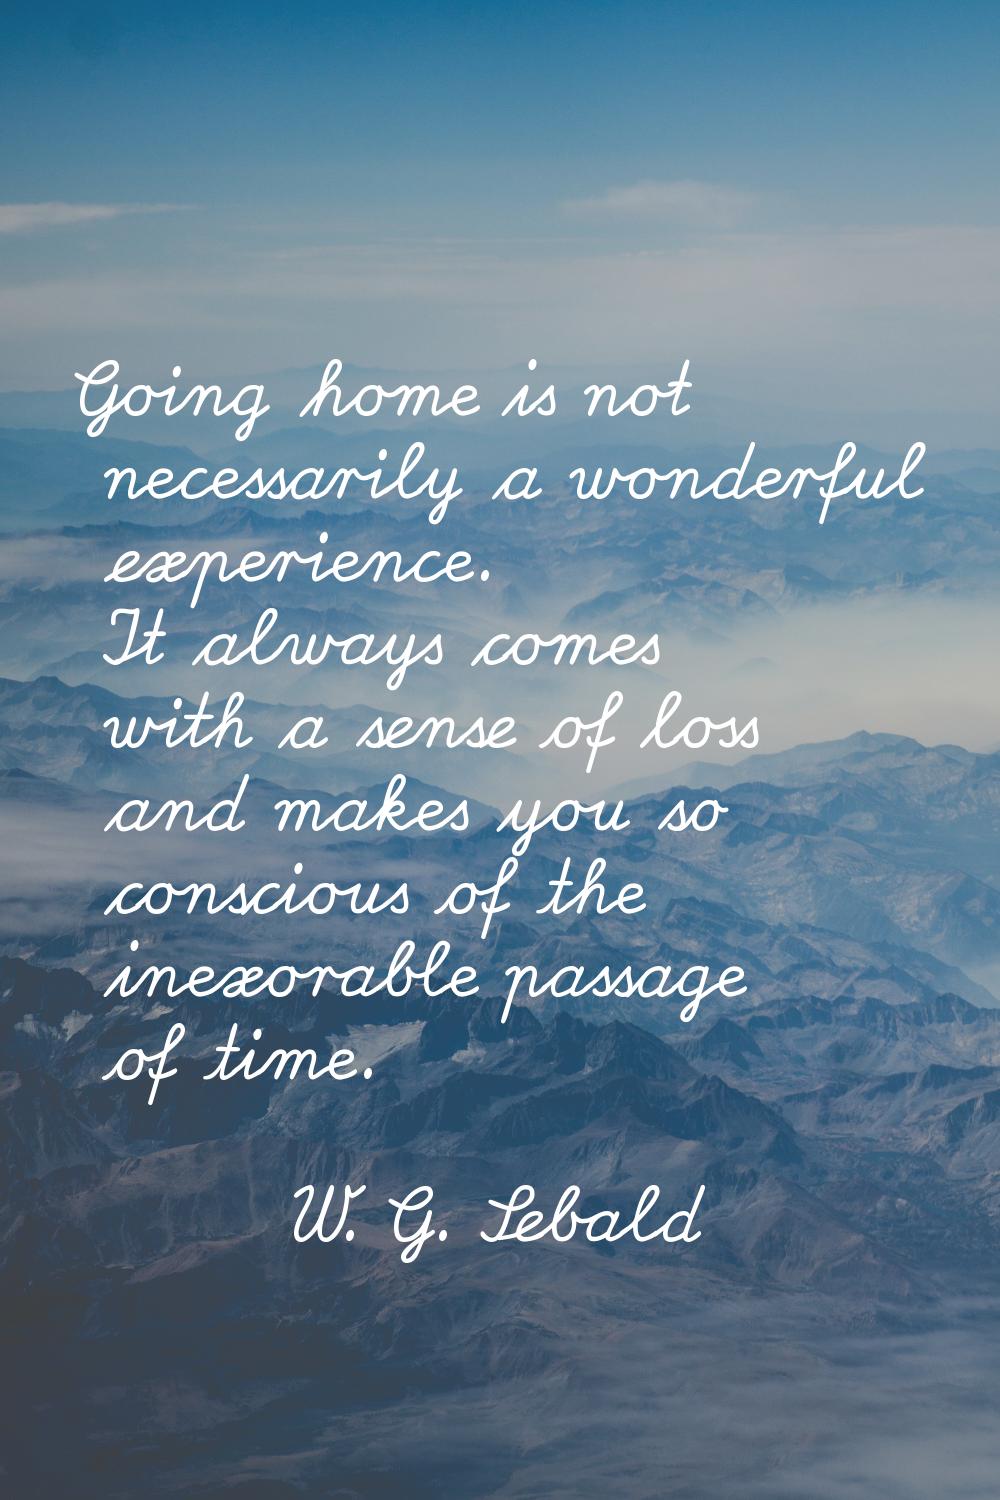 Going home is not necessarily a wonderful experience. It always comes with a sense of loss and make